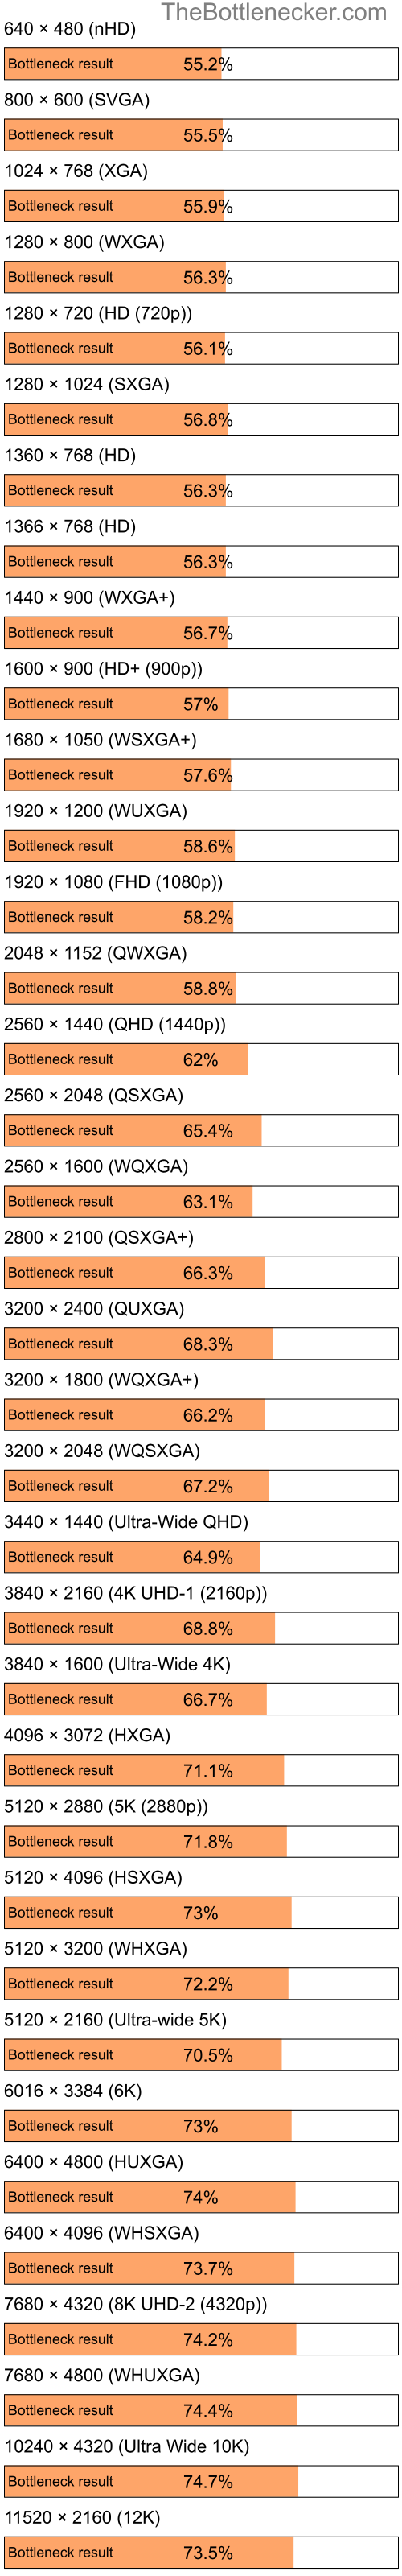 Bottleneck results by resolution for Intel Atom N270 and AMD Mobility Radeon X1600 in Processor Intense Tasks